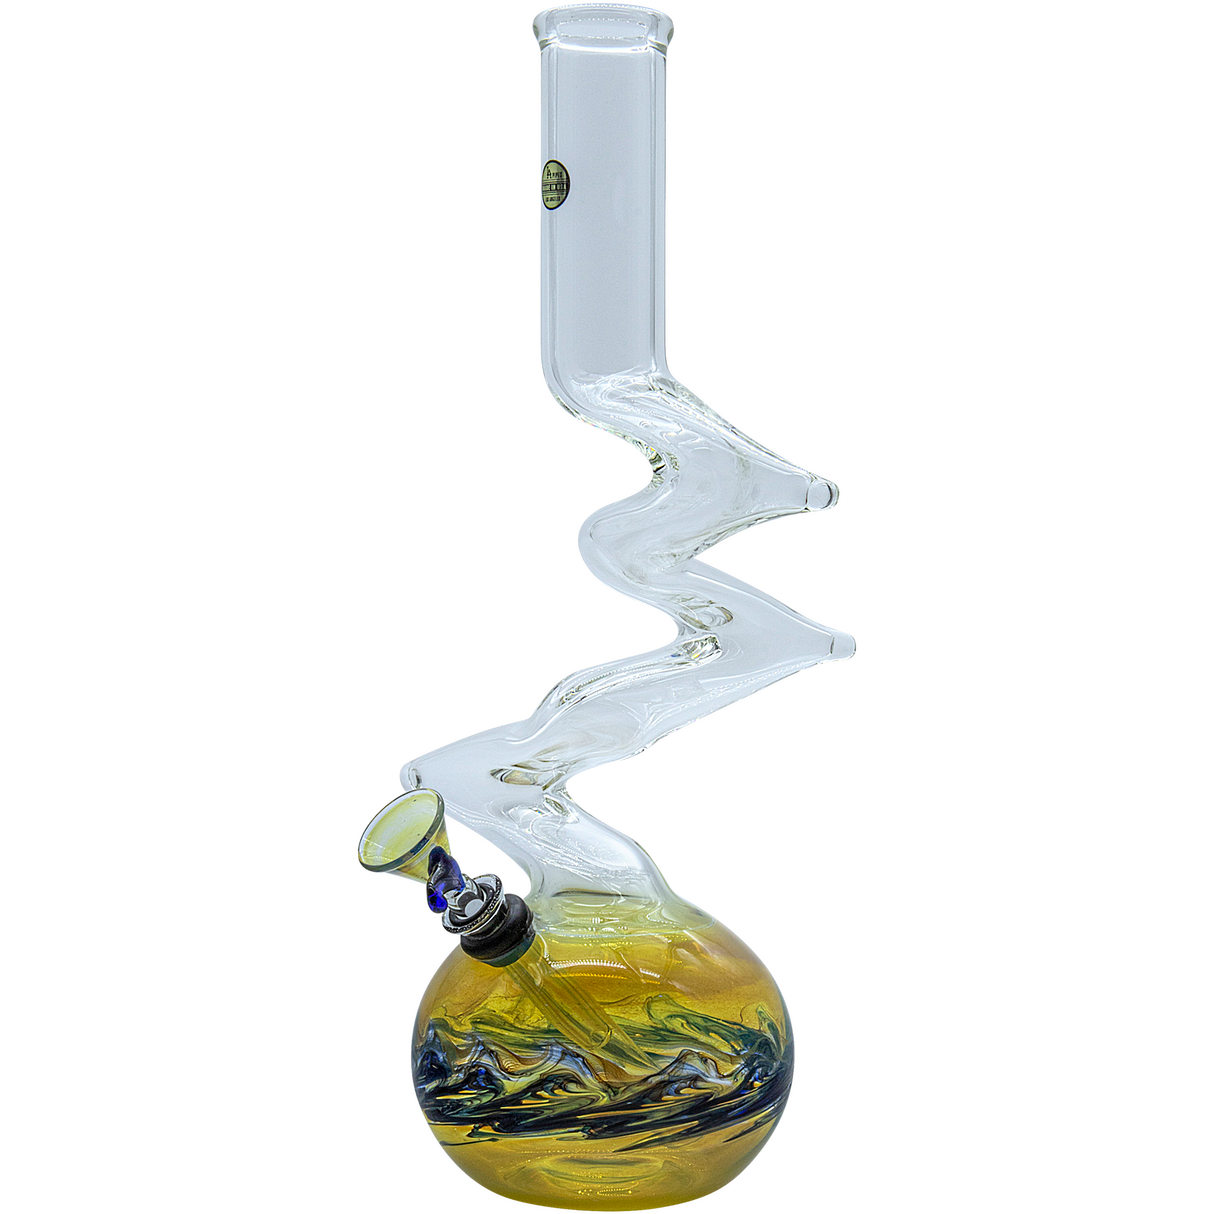 LA Pipes "Switchback" Bubble Base Bong in blue, featuring a zigzag neck and grommet joint, side view on white background